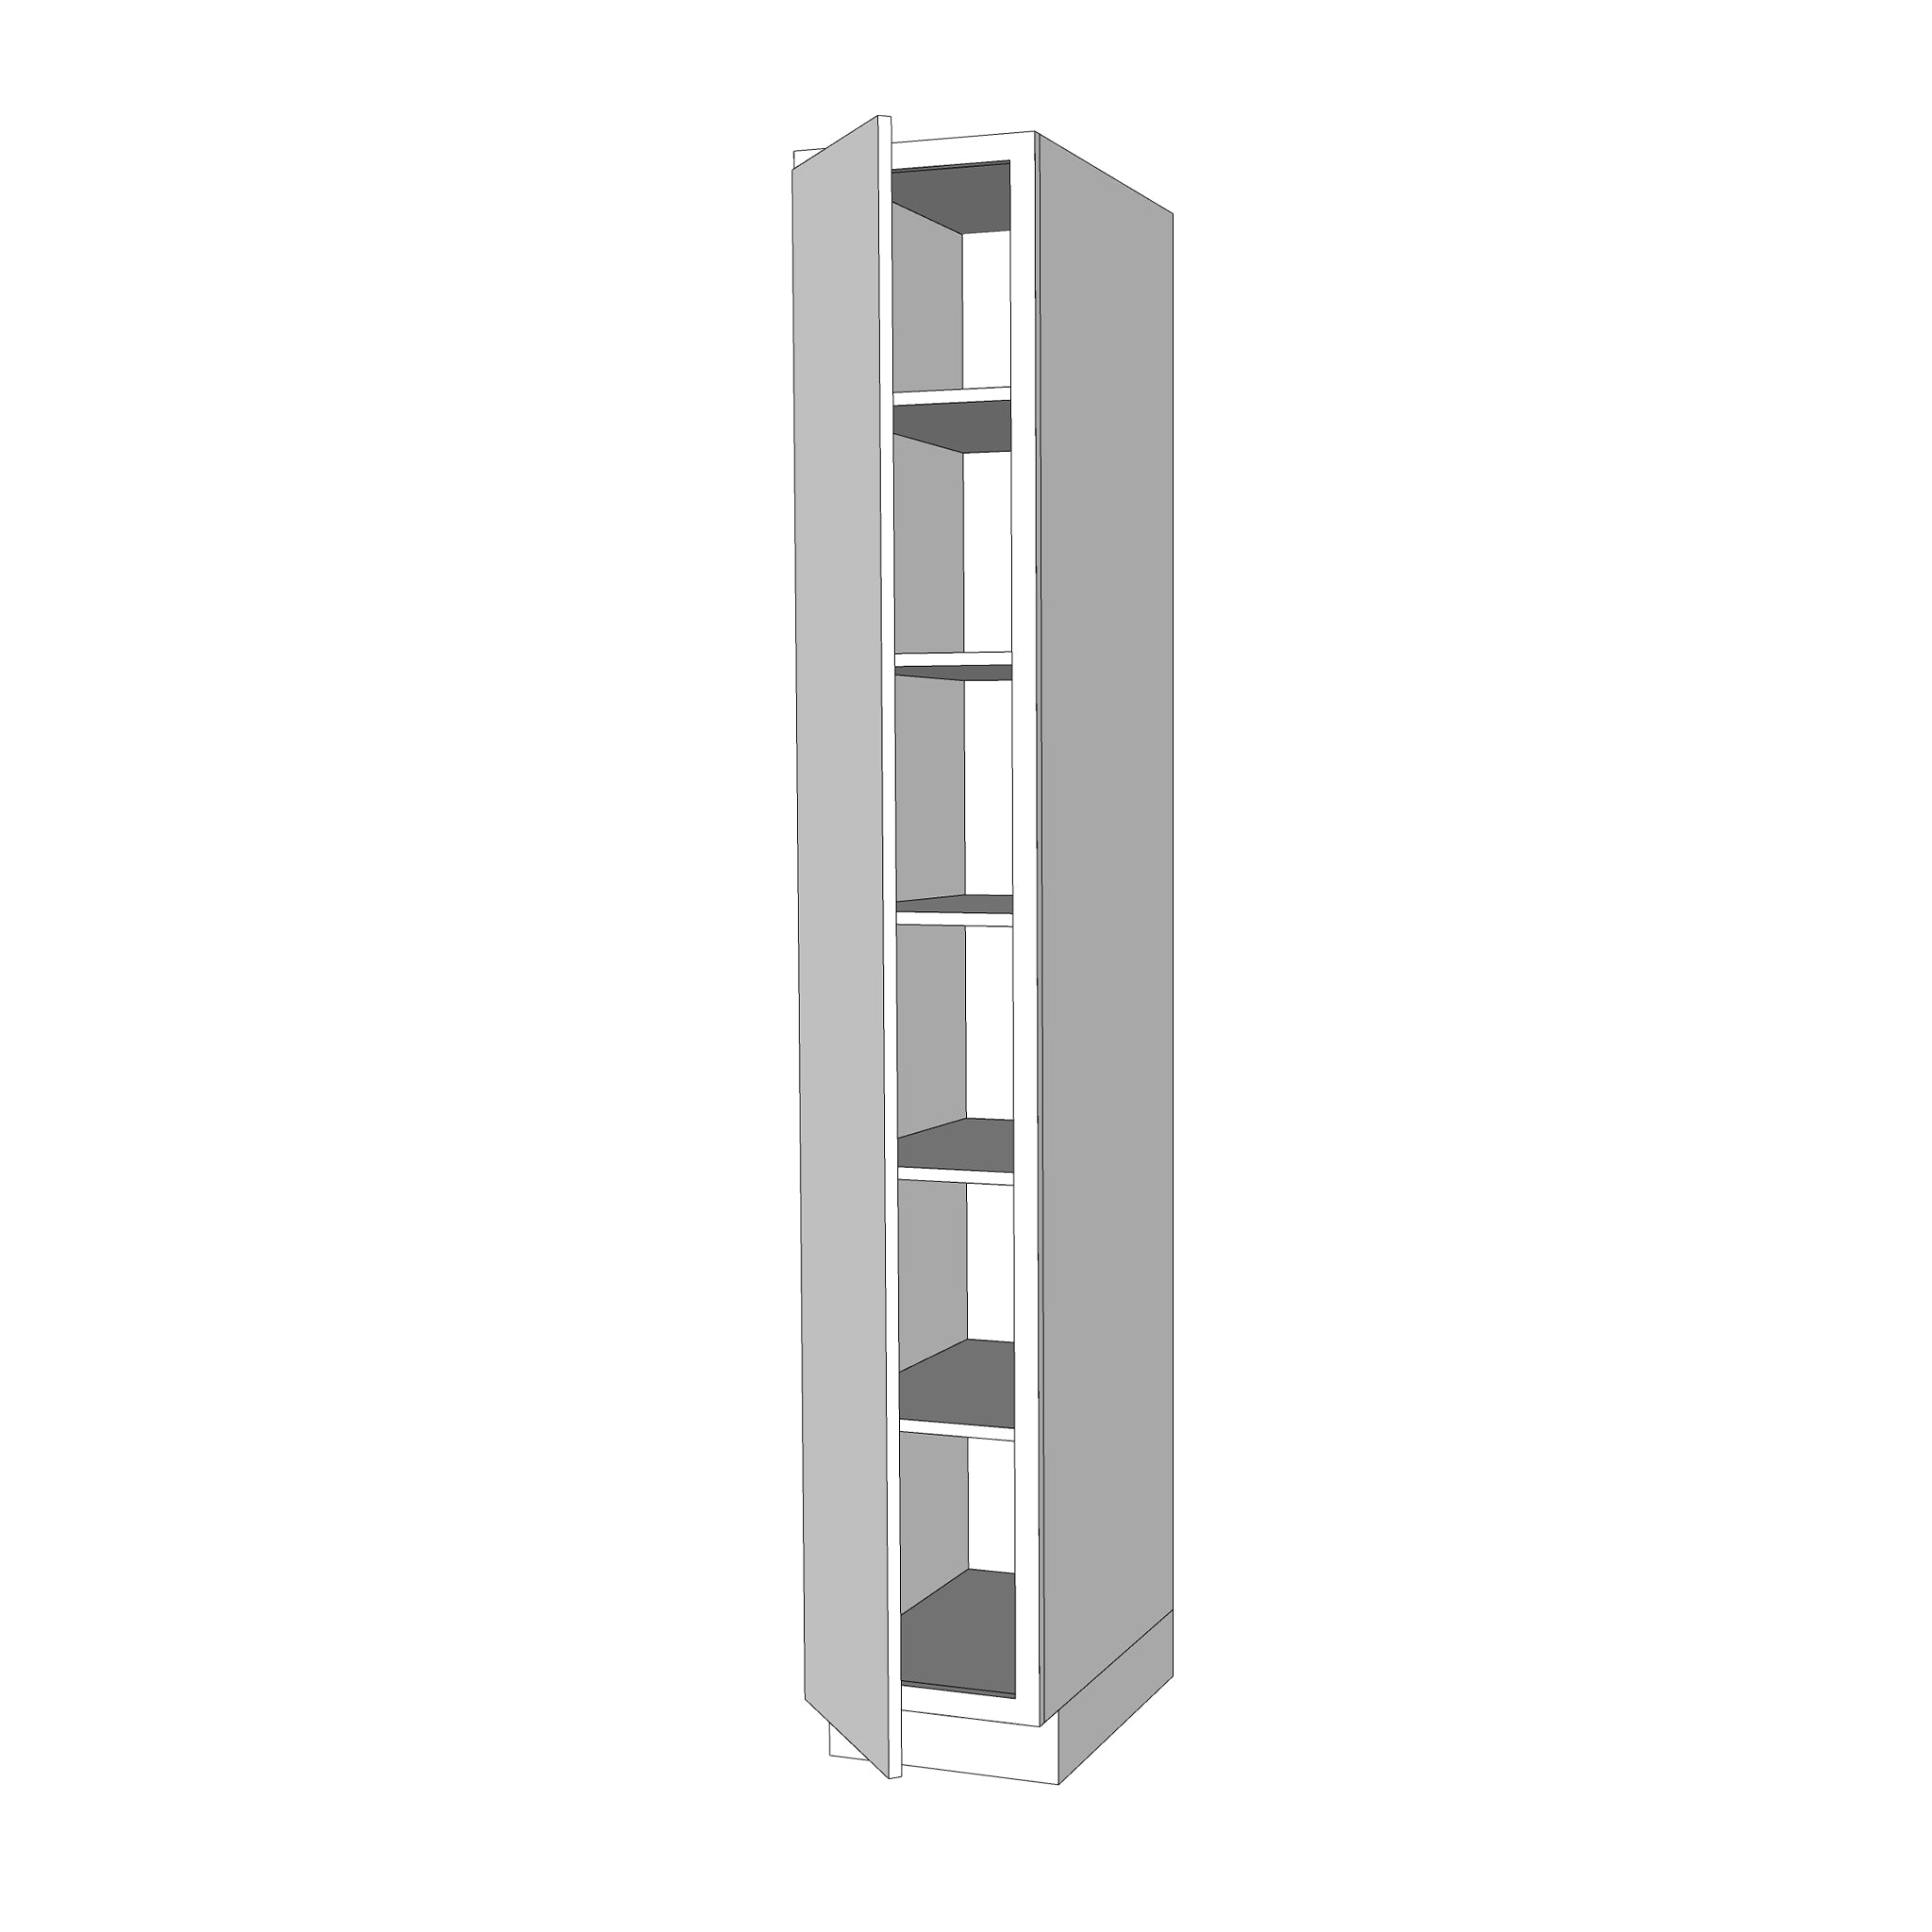 15x95 High Pantry Cabinet - Assembled